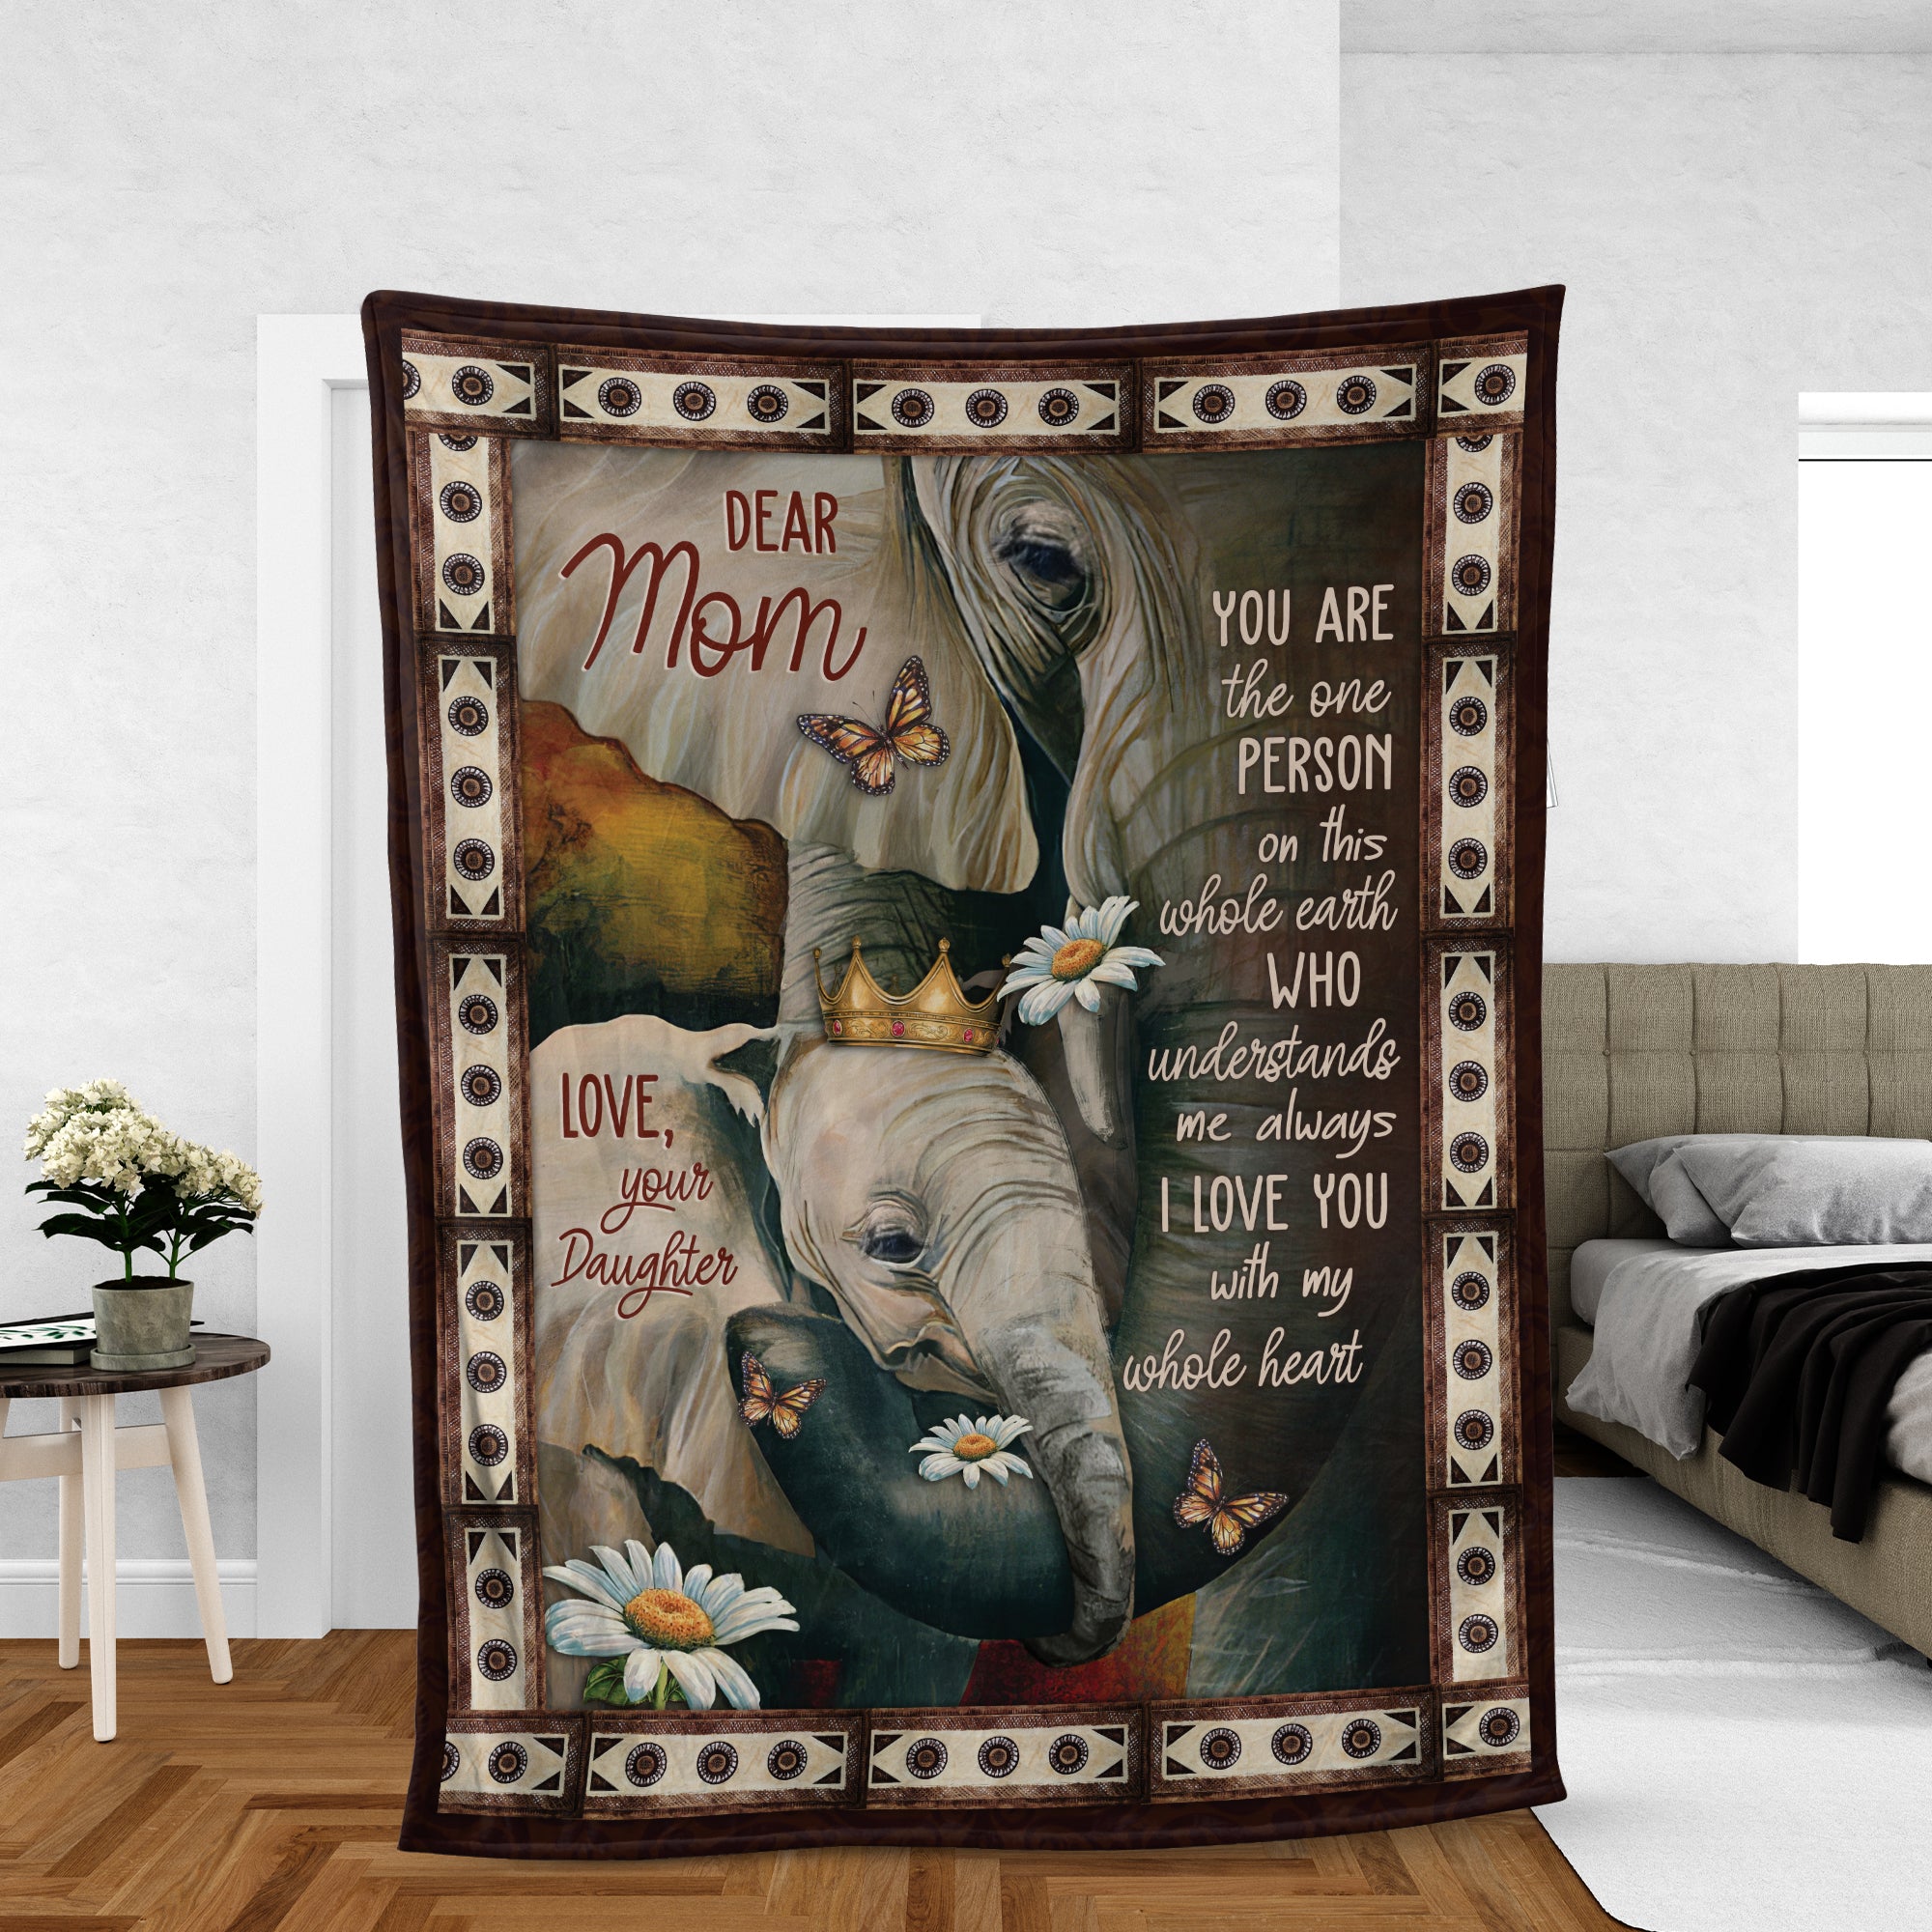 Mother's Day Gift Blanket, Daughter And Mom Blanket, Gifts For Mom From Daughter - Daughter To Mom, Elephant Blanket, I Love You With My Whole Heart